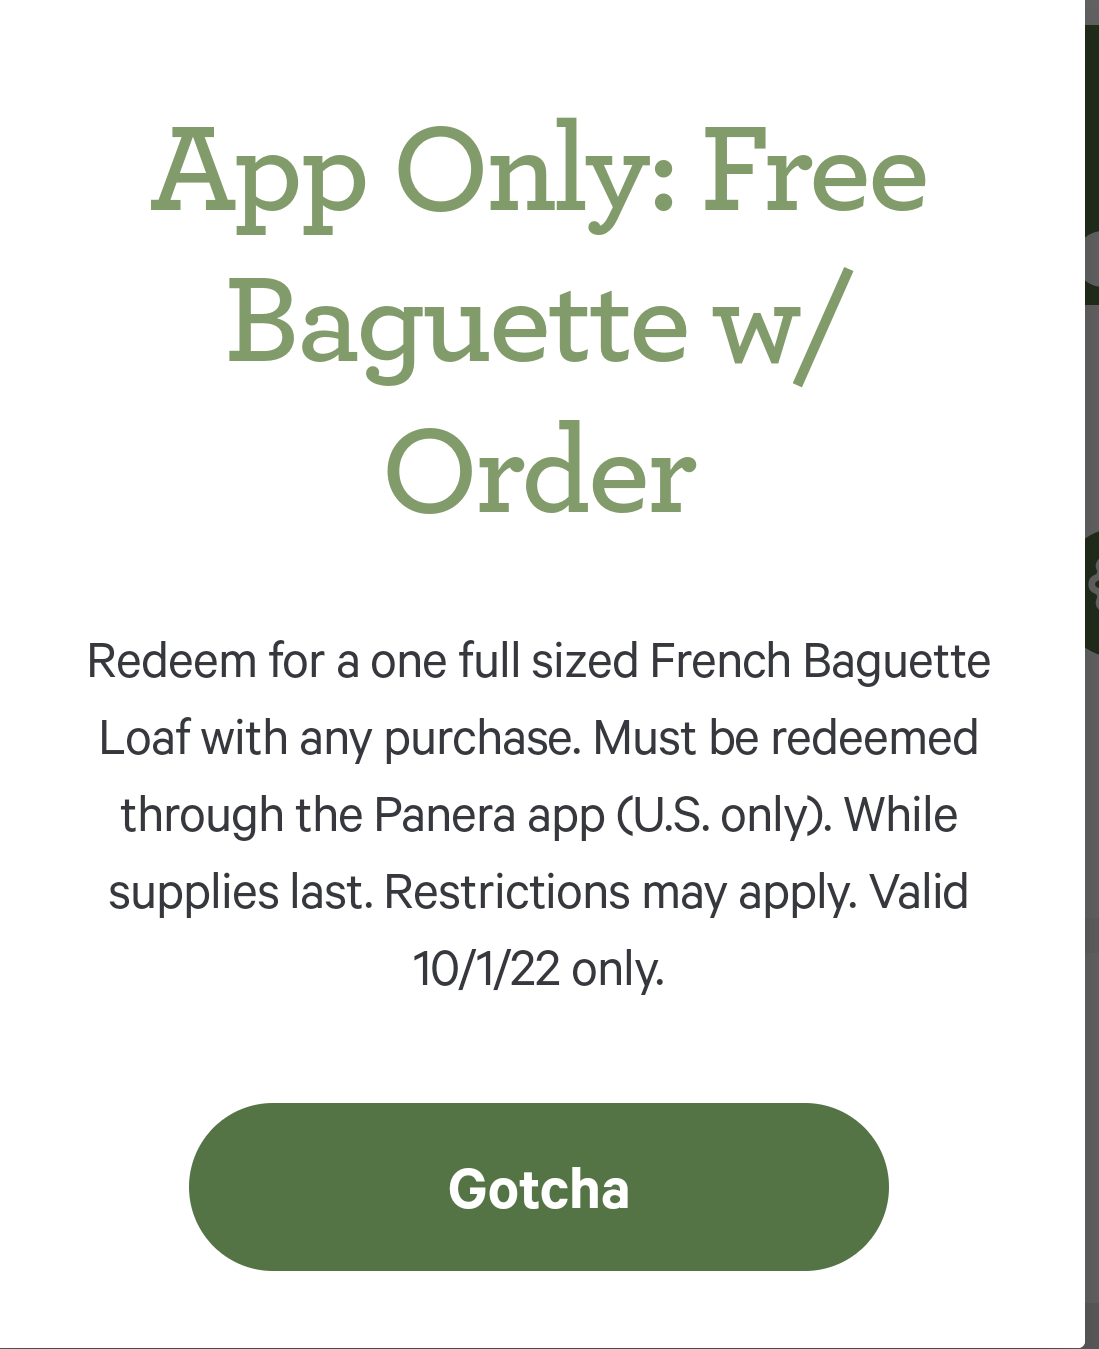 Panera Free Baguette with purchase in app